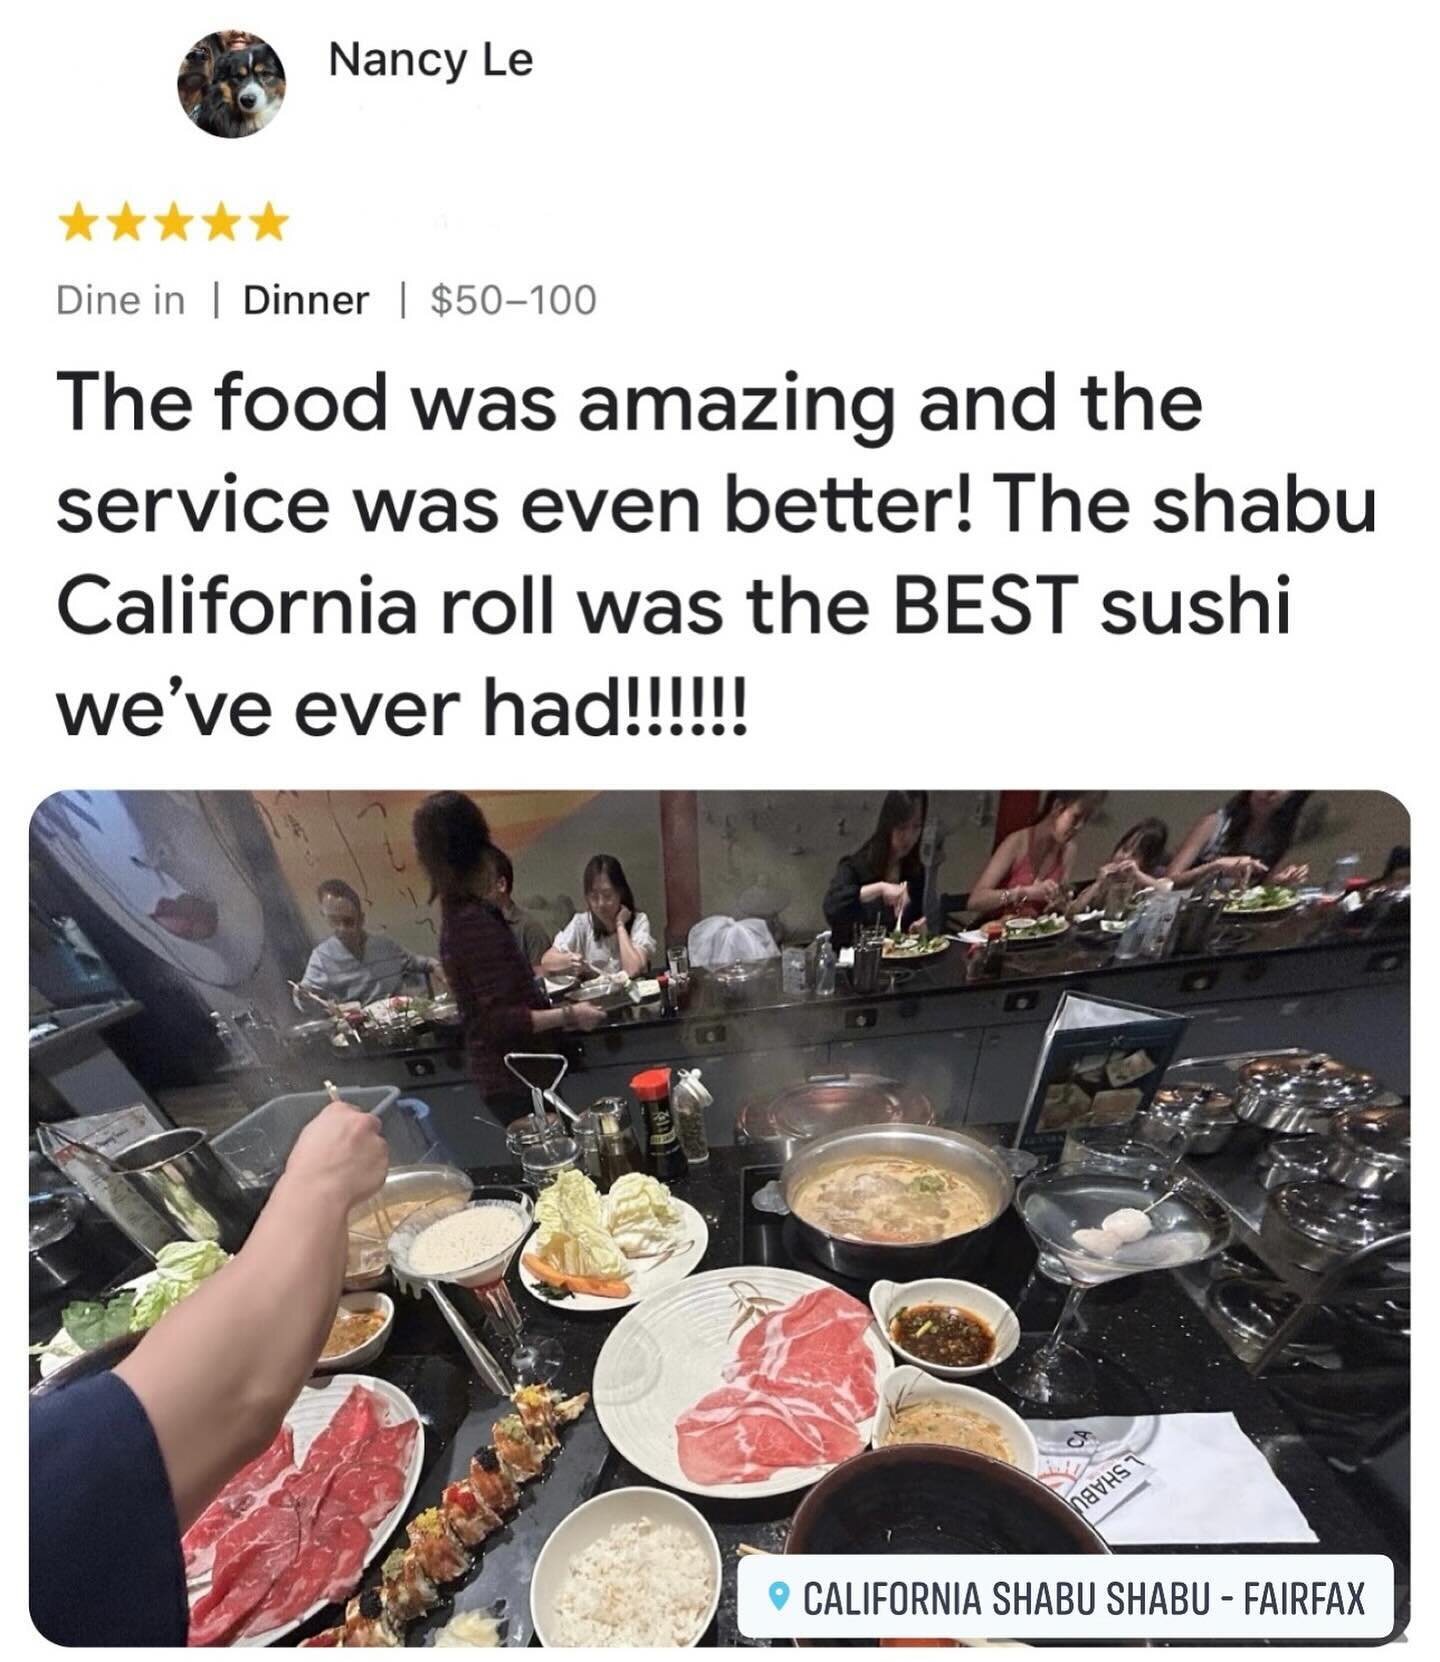 We're thrilled to share Nancy Le's glowing 5-star Google review! ⭐️⭐️⭐️⭐️⭐️
Make your Friday fantastic with us at California Shabu Shabu. Dive into deliciousness and enjoy an engaging dining experience. 🍶🍣